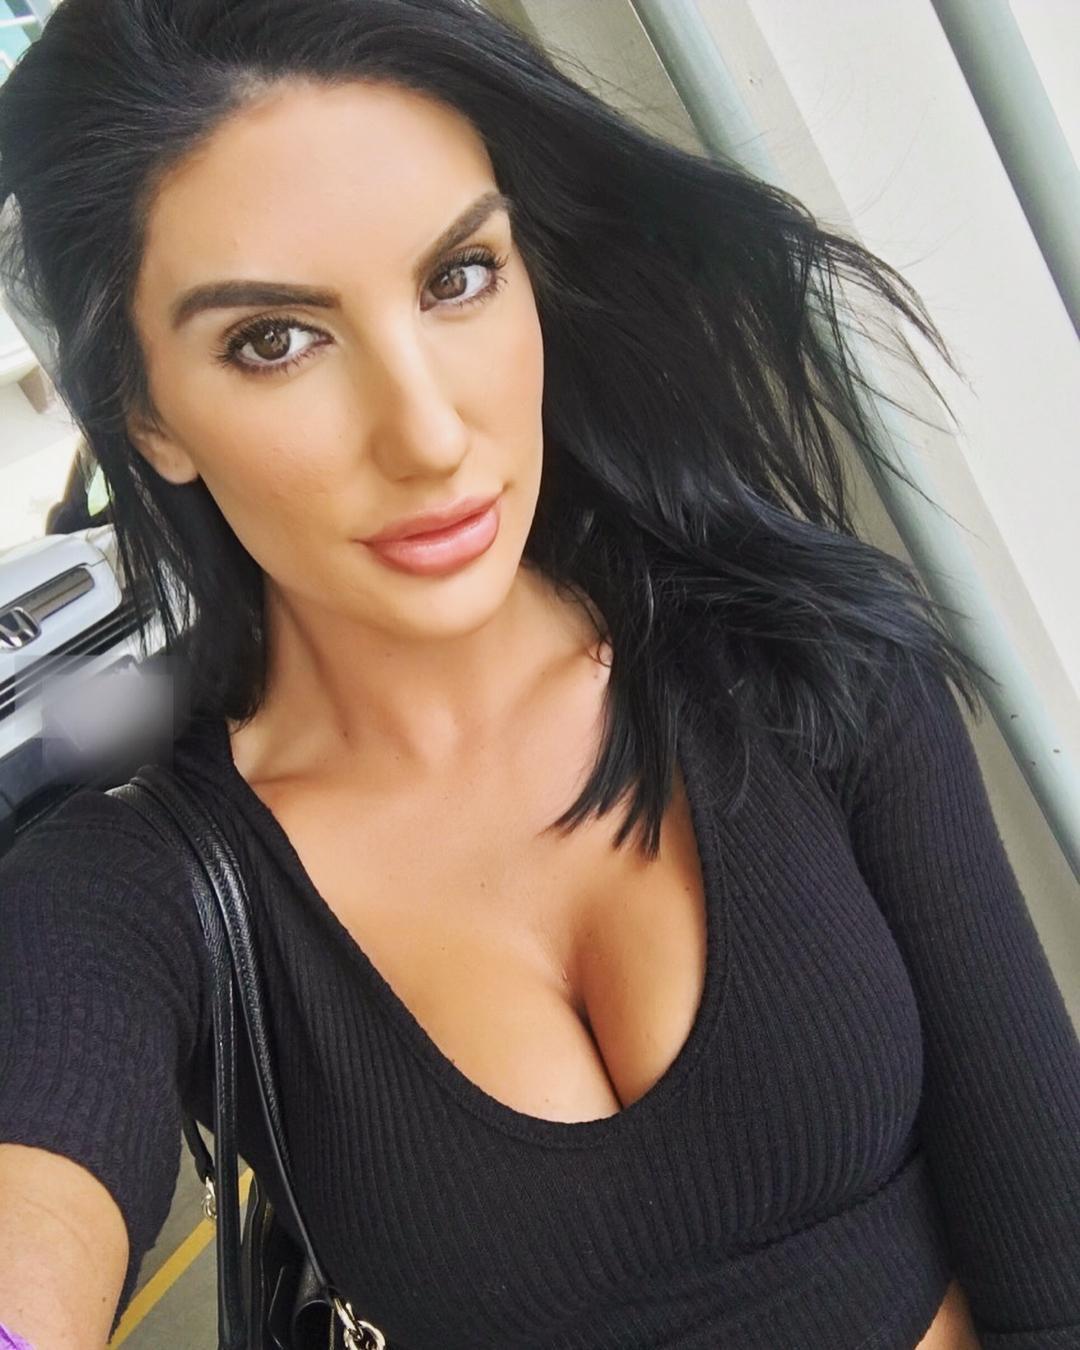 Extremely cute pornstar August Ames in a low cut black shirt